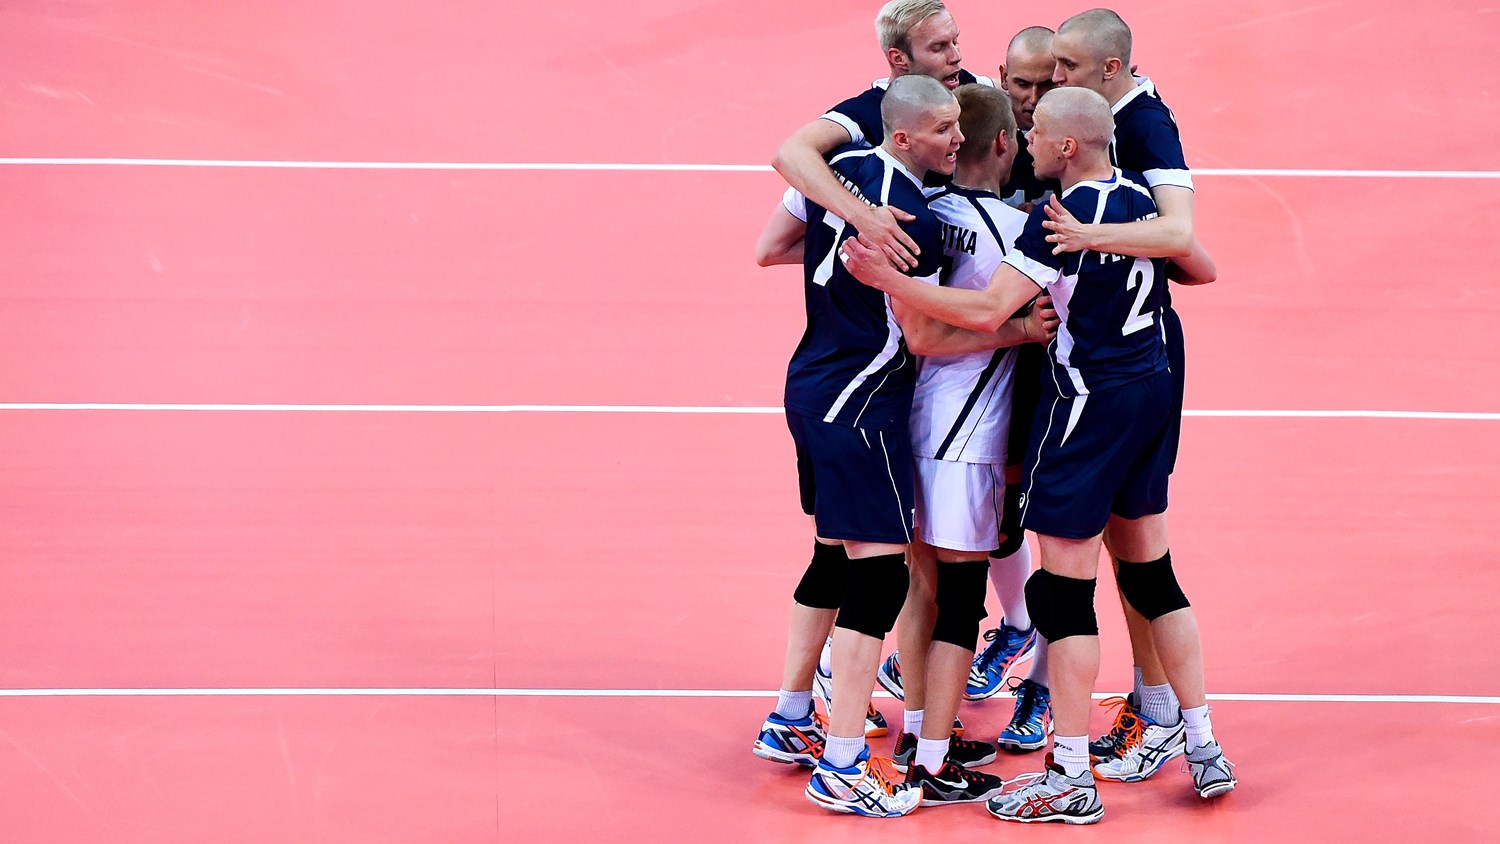 The bald facts about Finland's Volleyball team